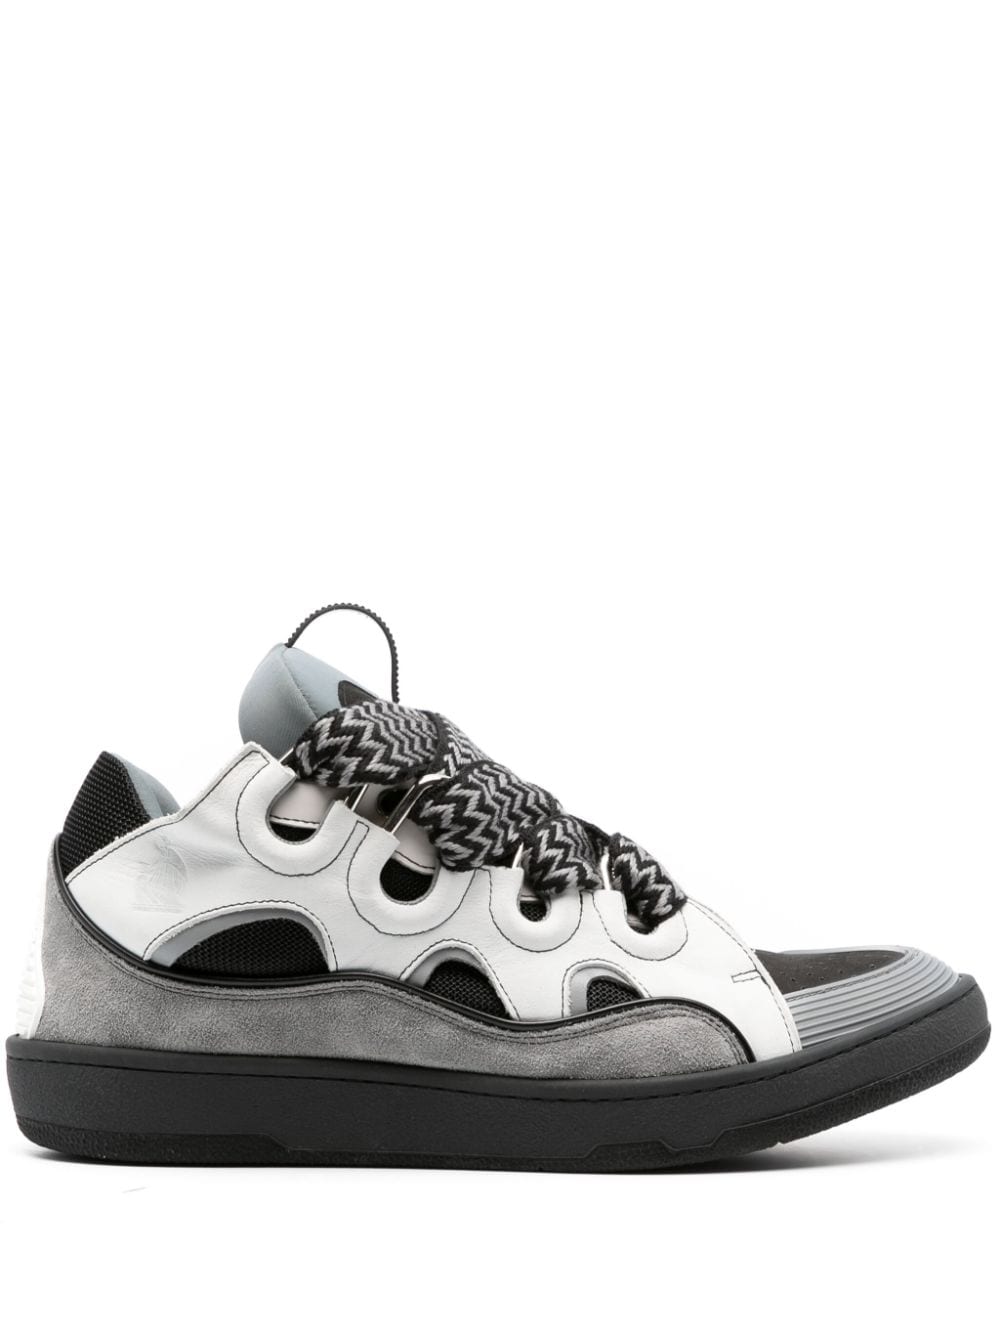 LANVIN Grey Leather Sneakers for Men - SS24 Collection